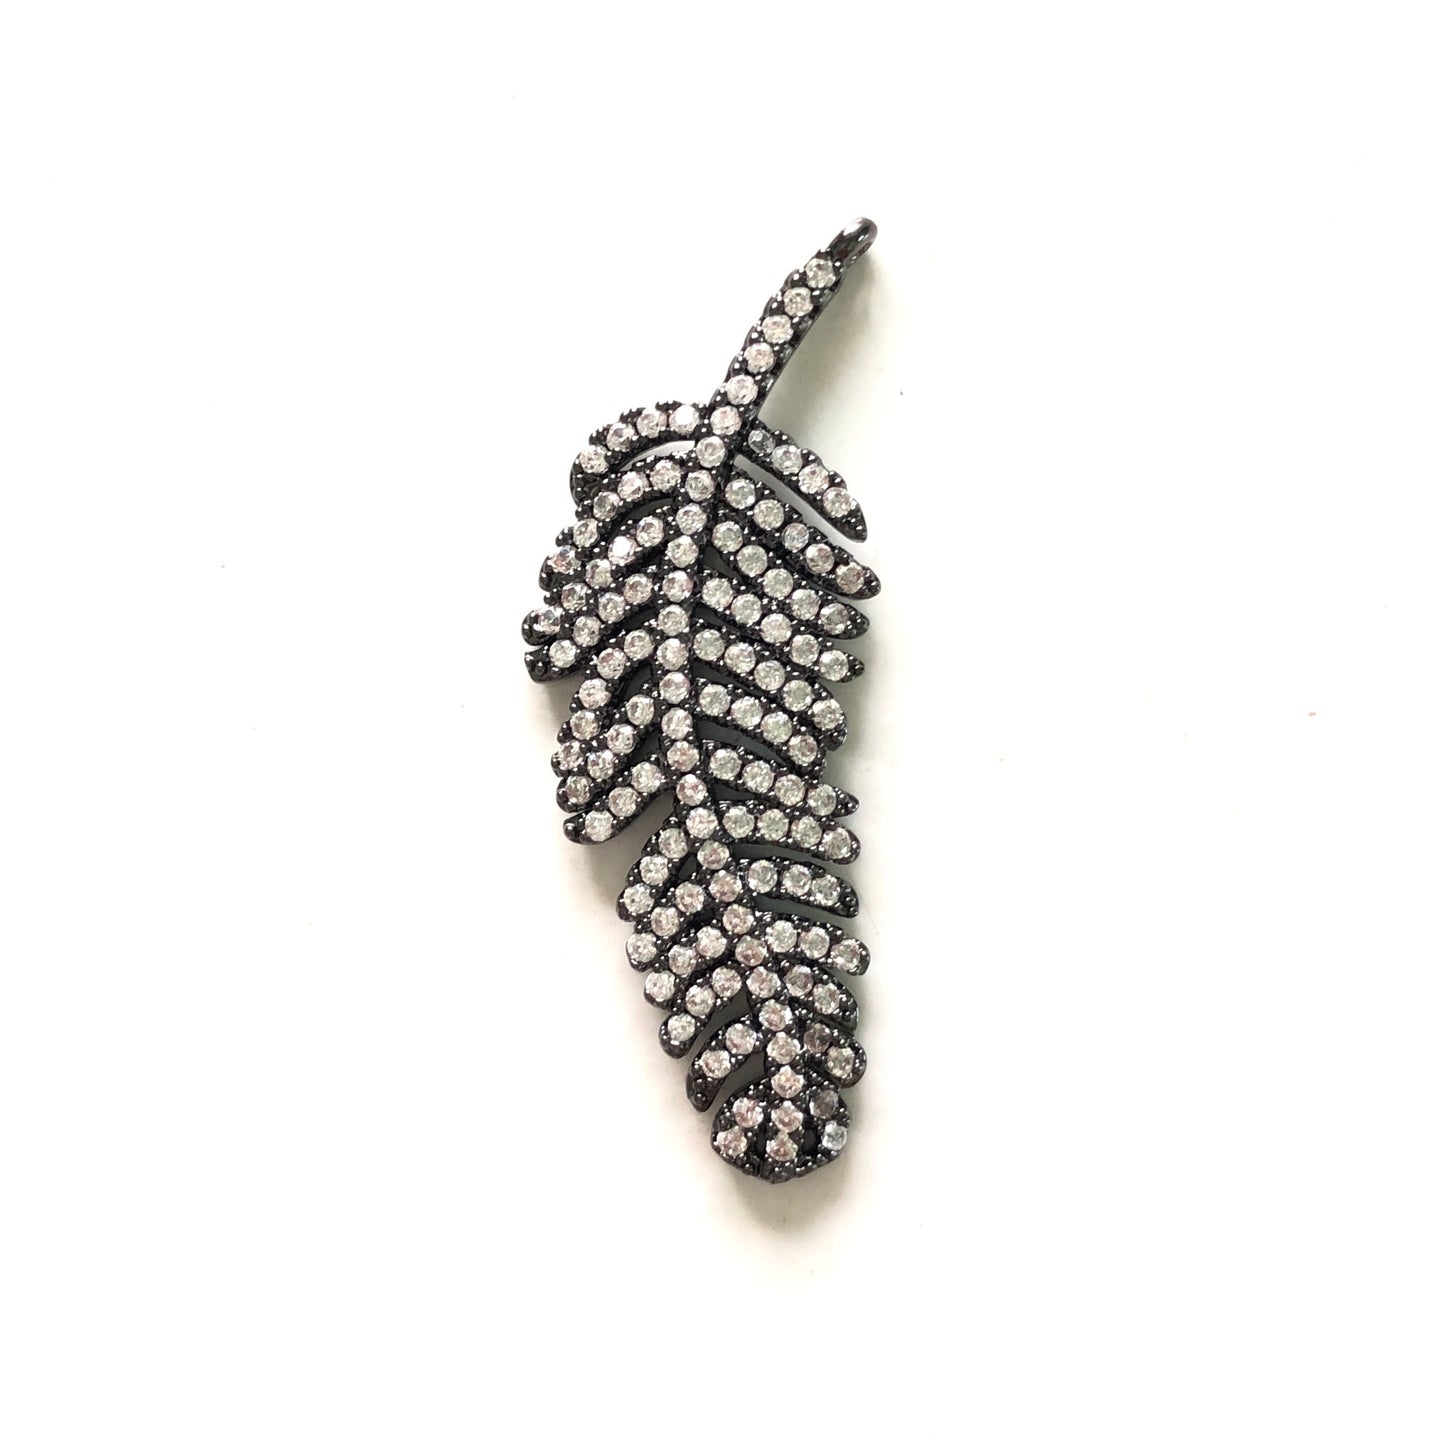 10pcs/lot 42*14.5mm CZ Paved Feather Charms Black CZ Paved Charms Feathers Charms Beads Beyond